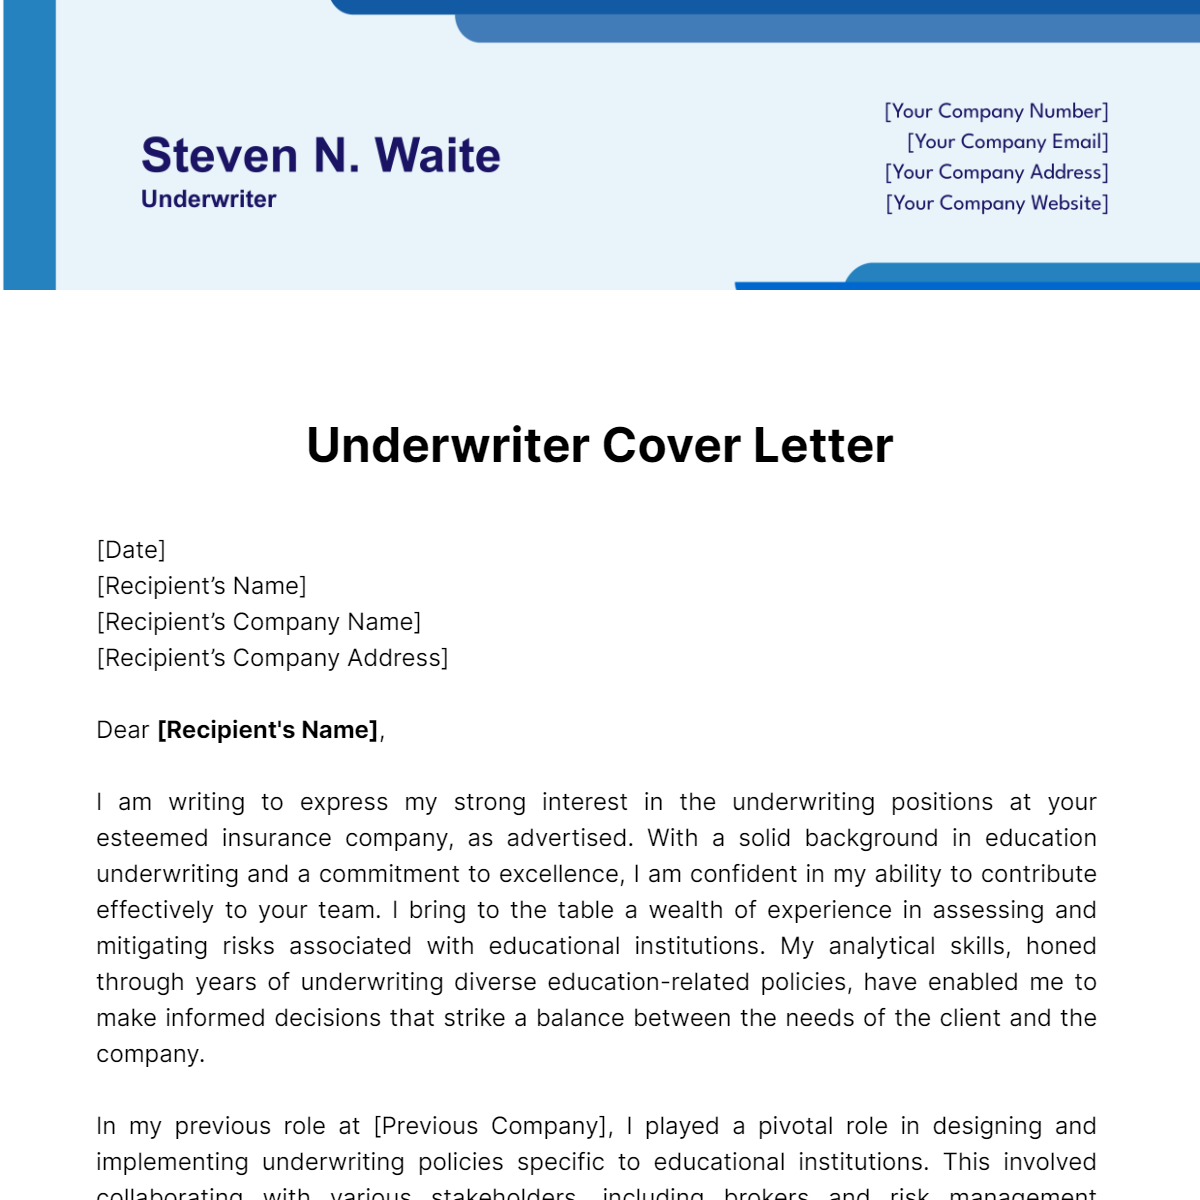 Underwriter Cover Letter Template